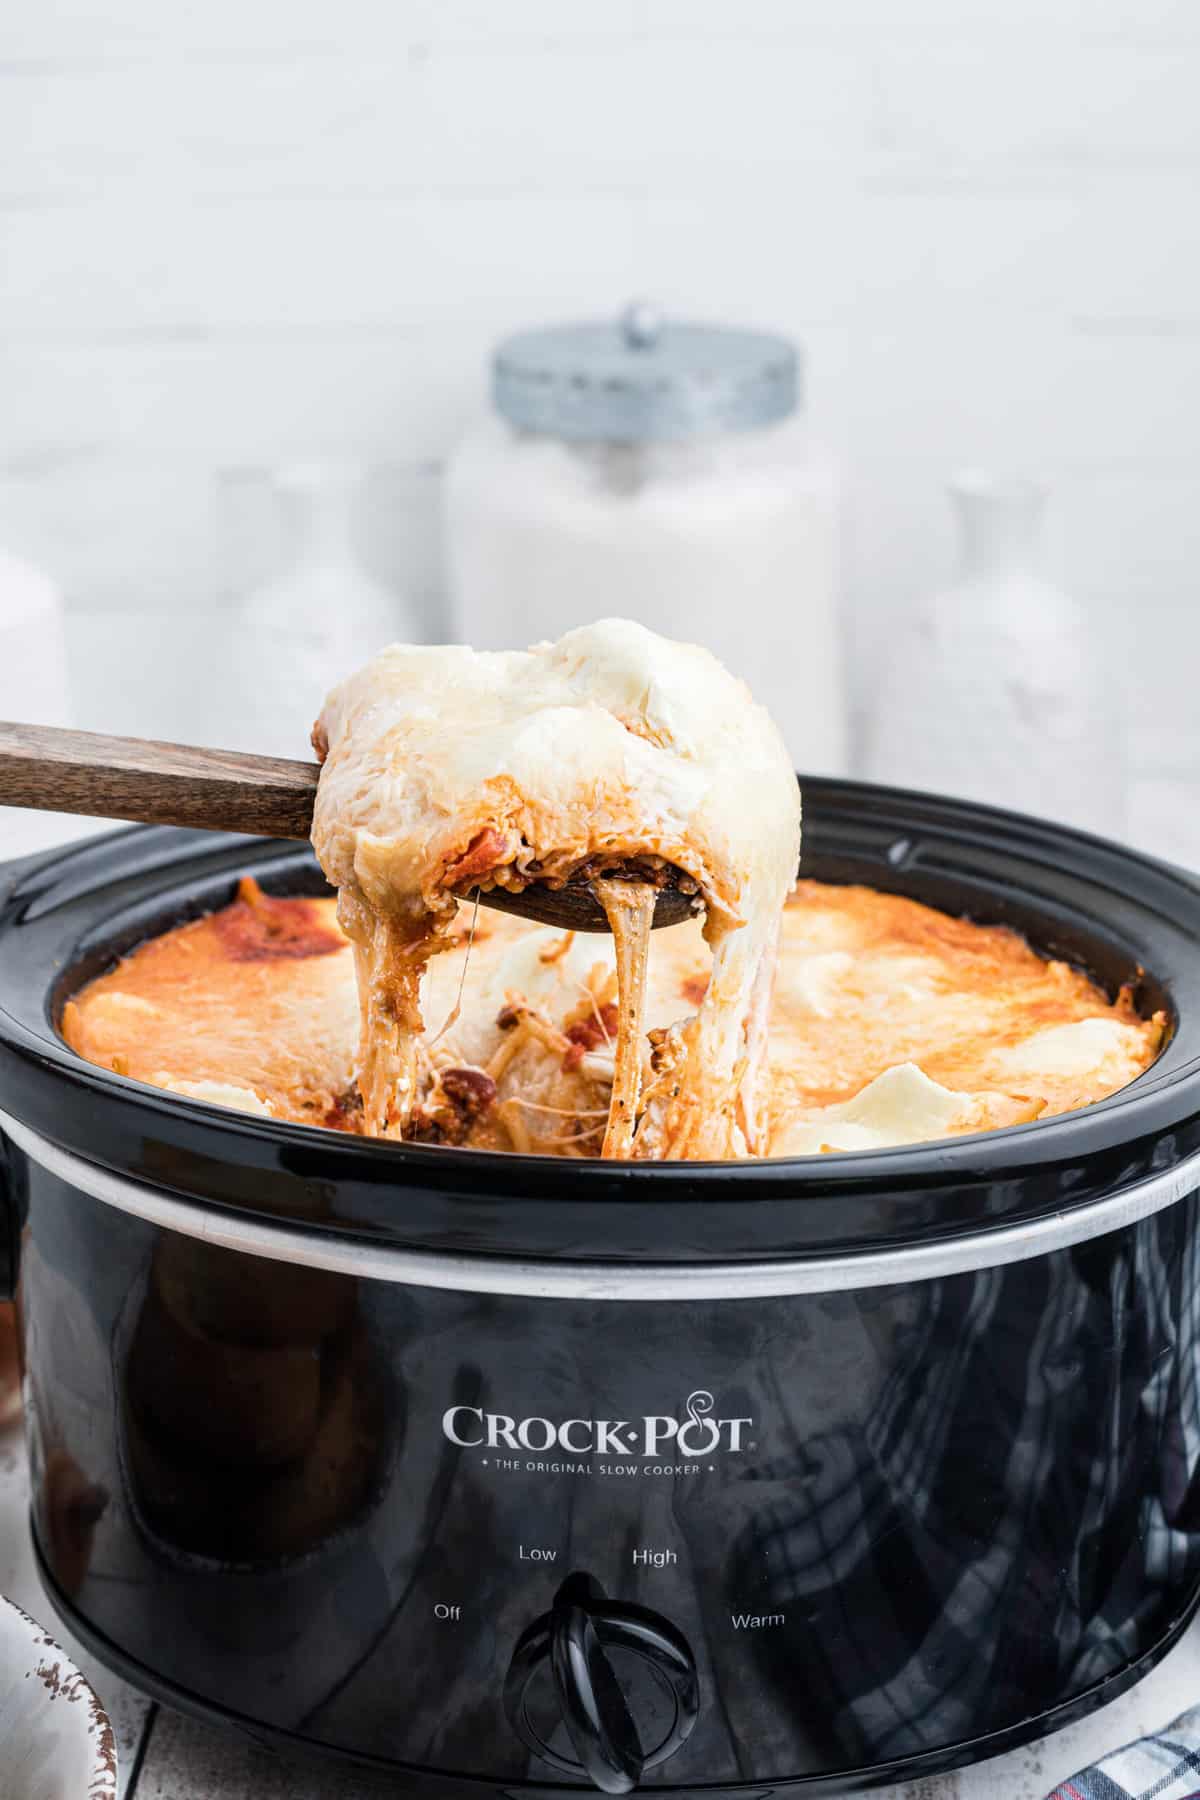 A cheesy serving of spaghetti is being lifted from the Crockpot.